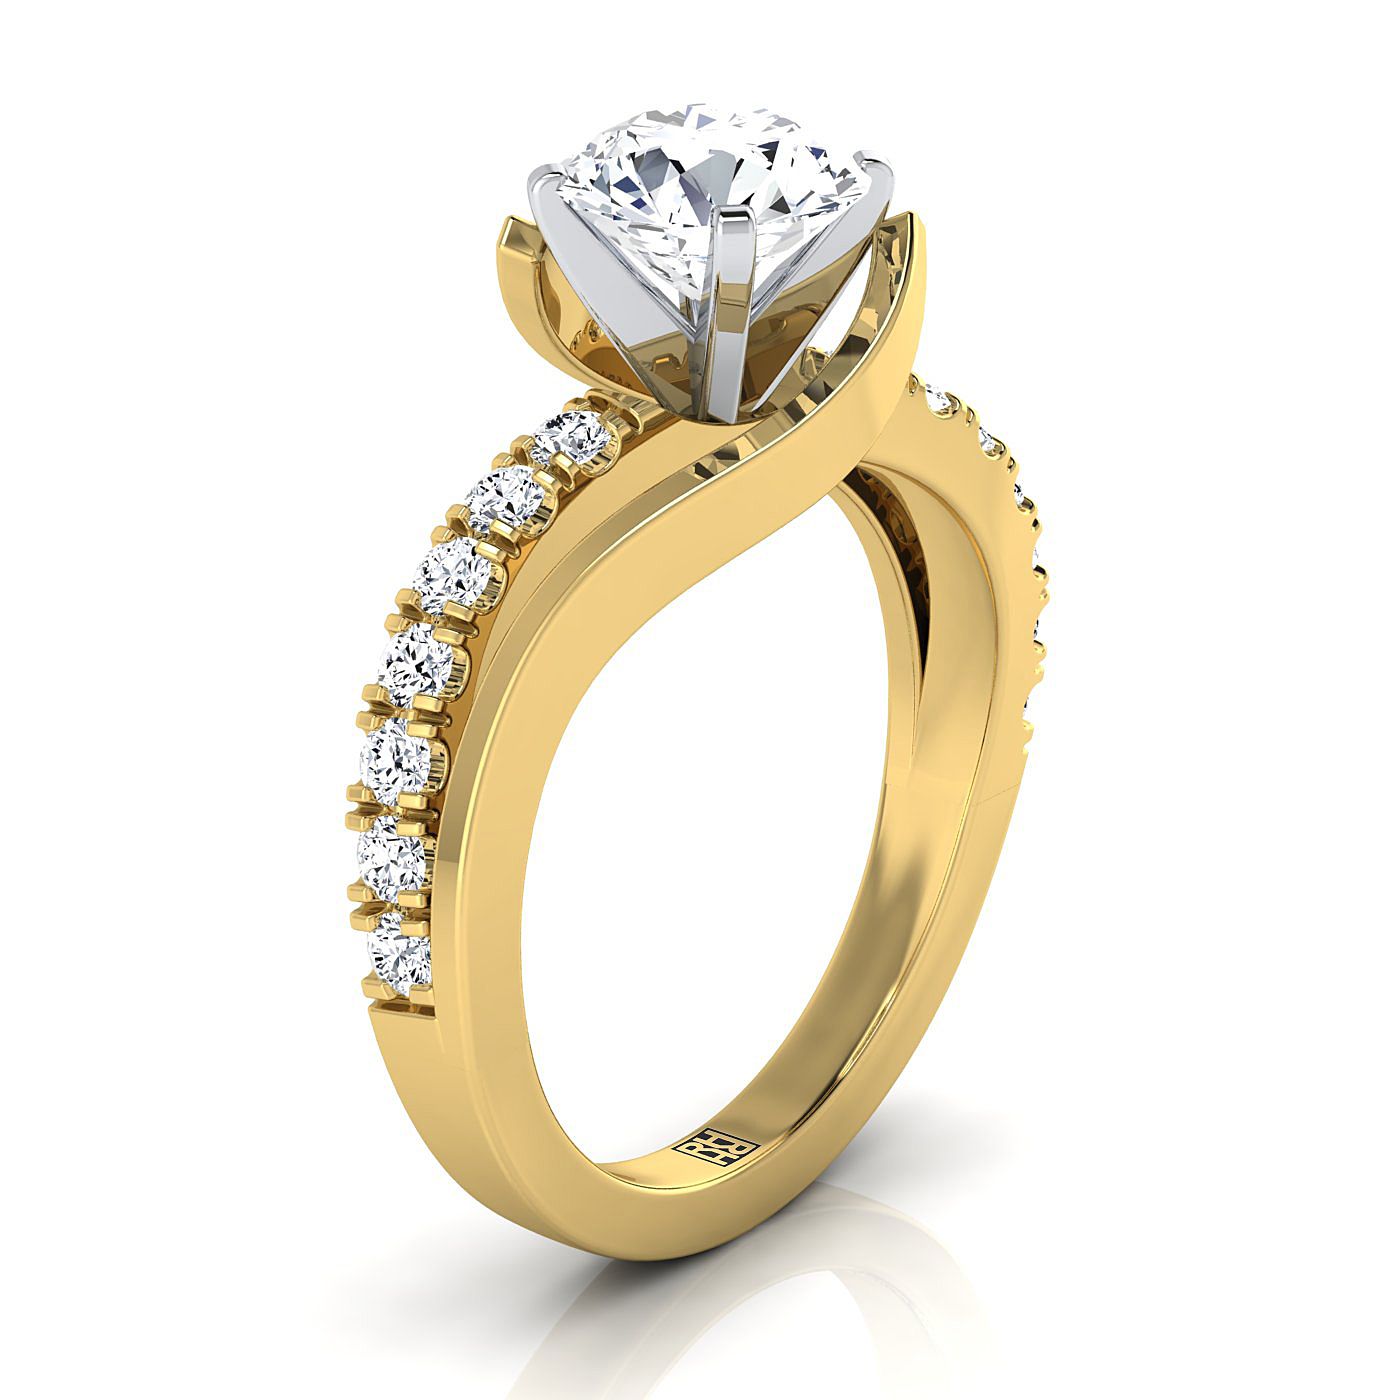 18K Yellow Gold Round Brilliant Unique Bypass Diamond Pave Swirl Engagement Ring -3/8ctw